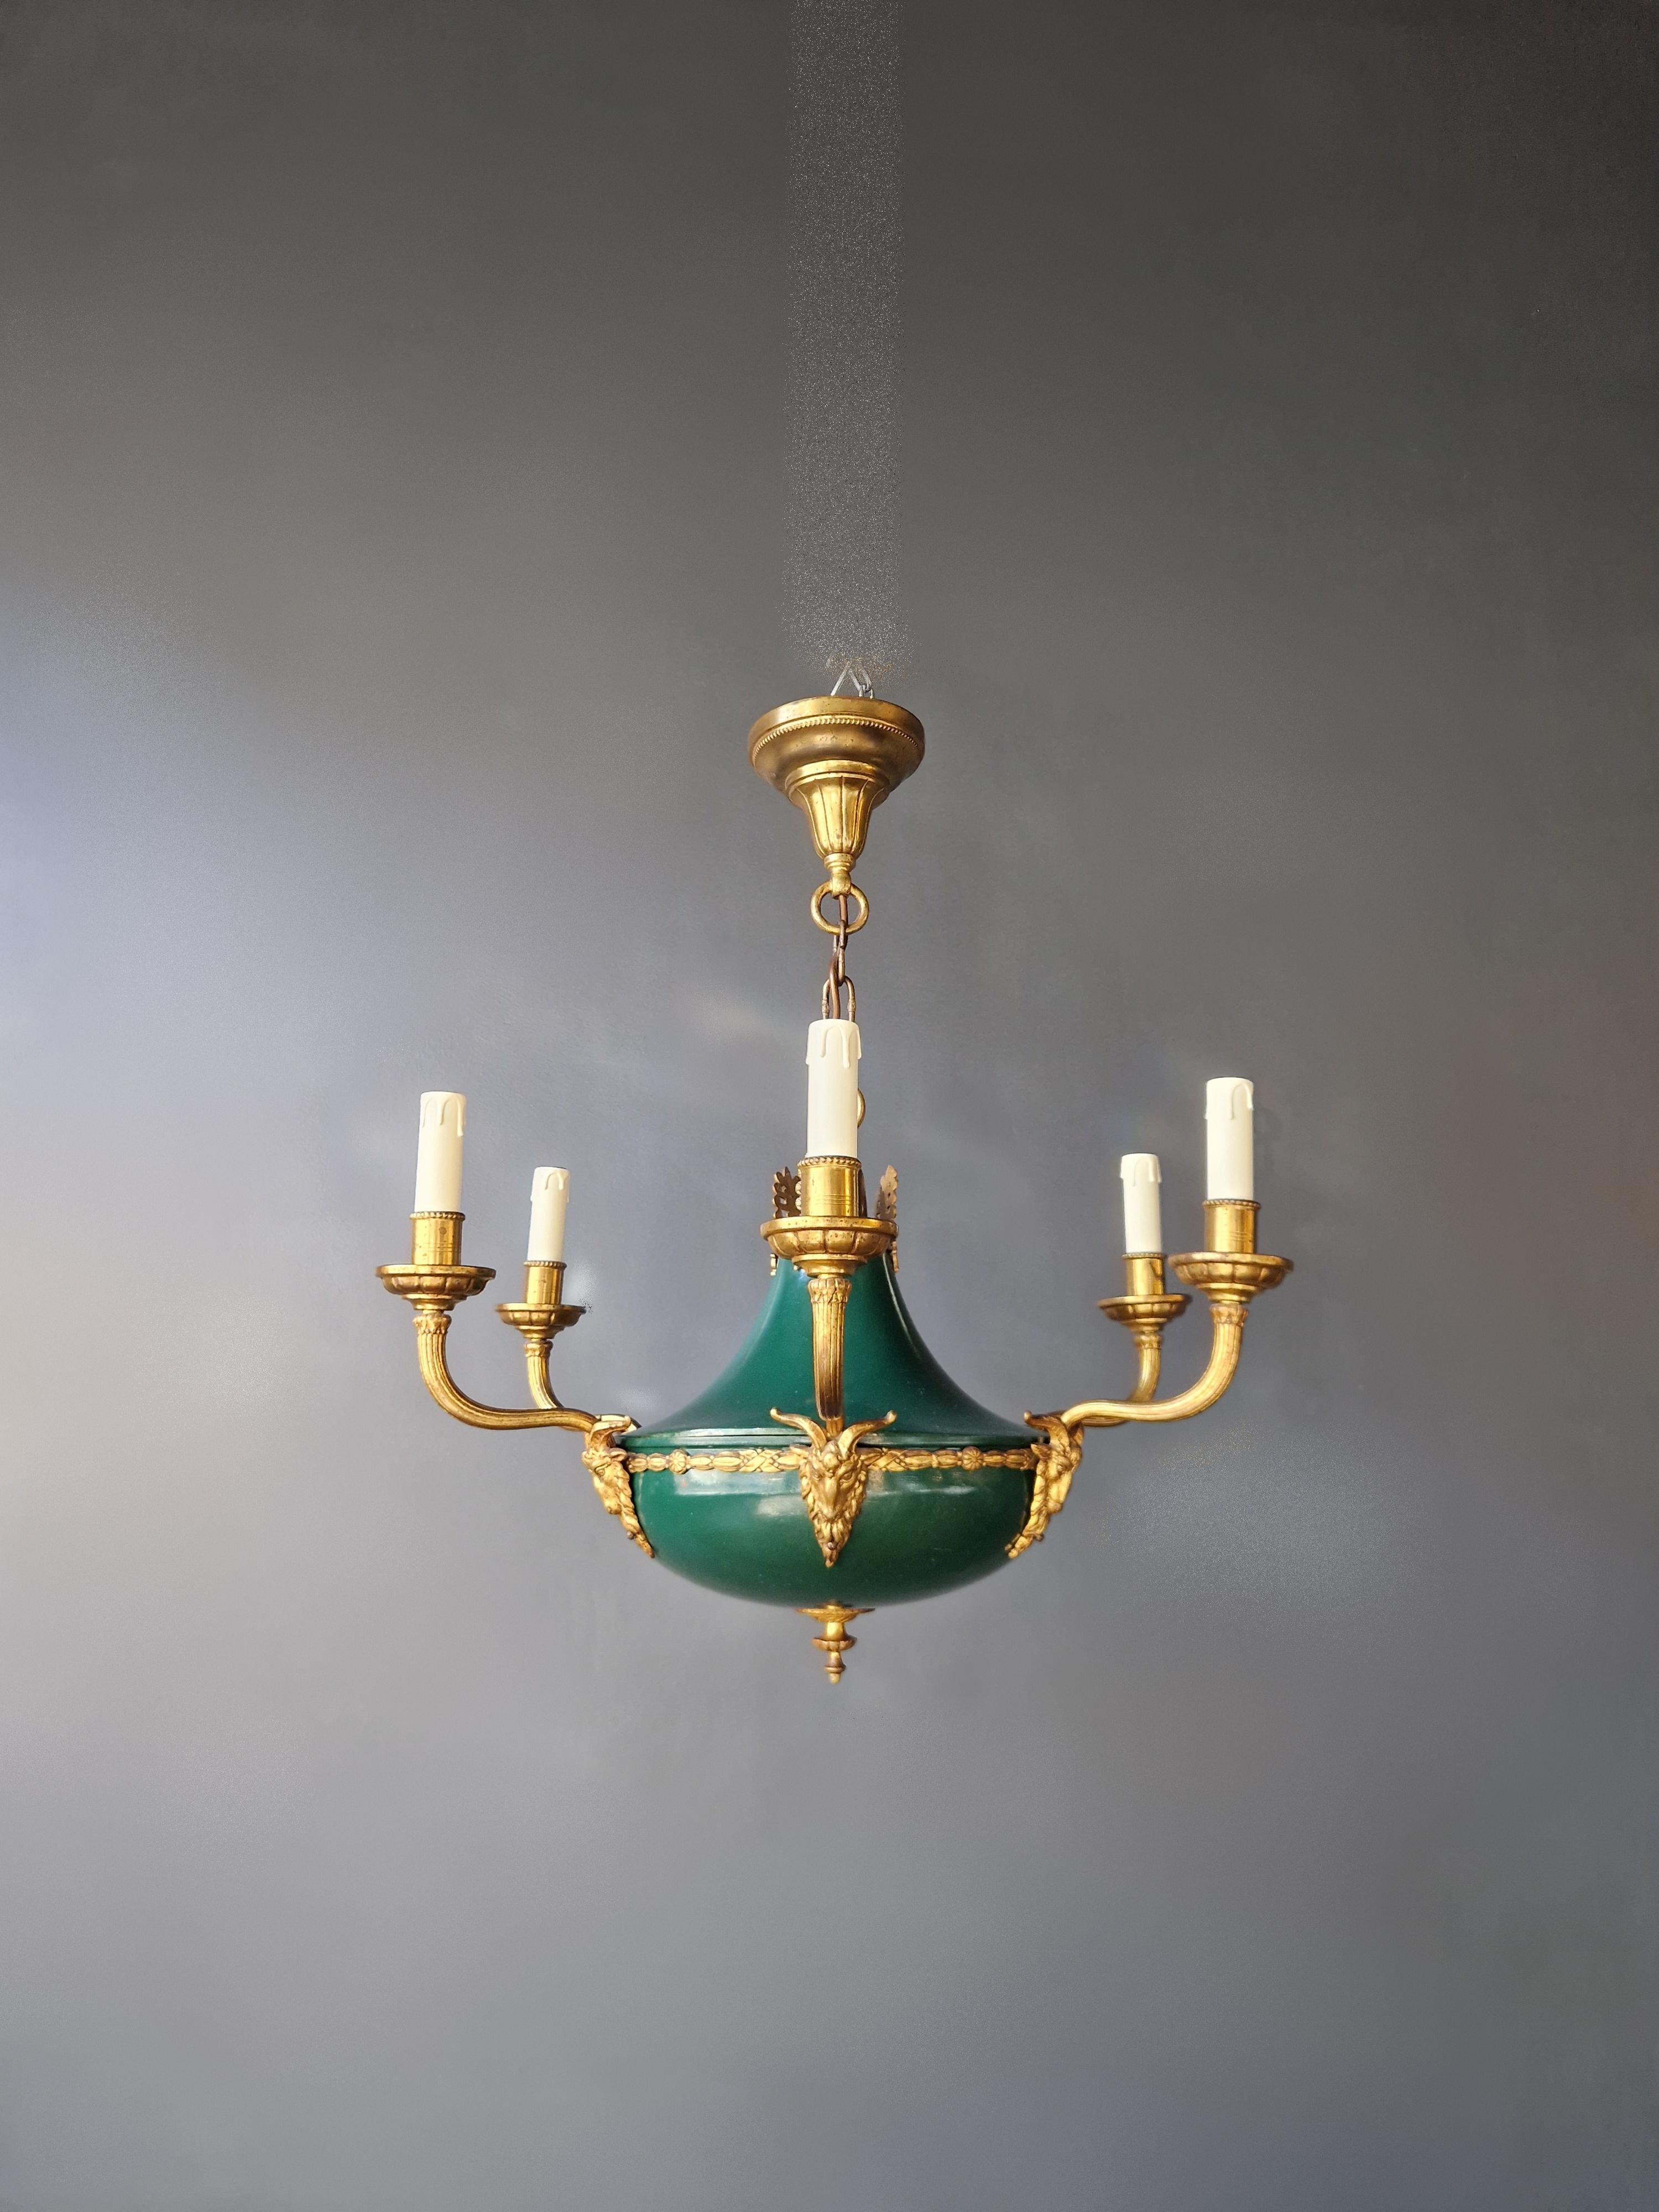 Gilt Antique Empire Lustre Neoclassical Patina Green Brass Chandelier For Sale 4